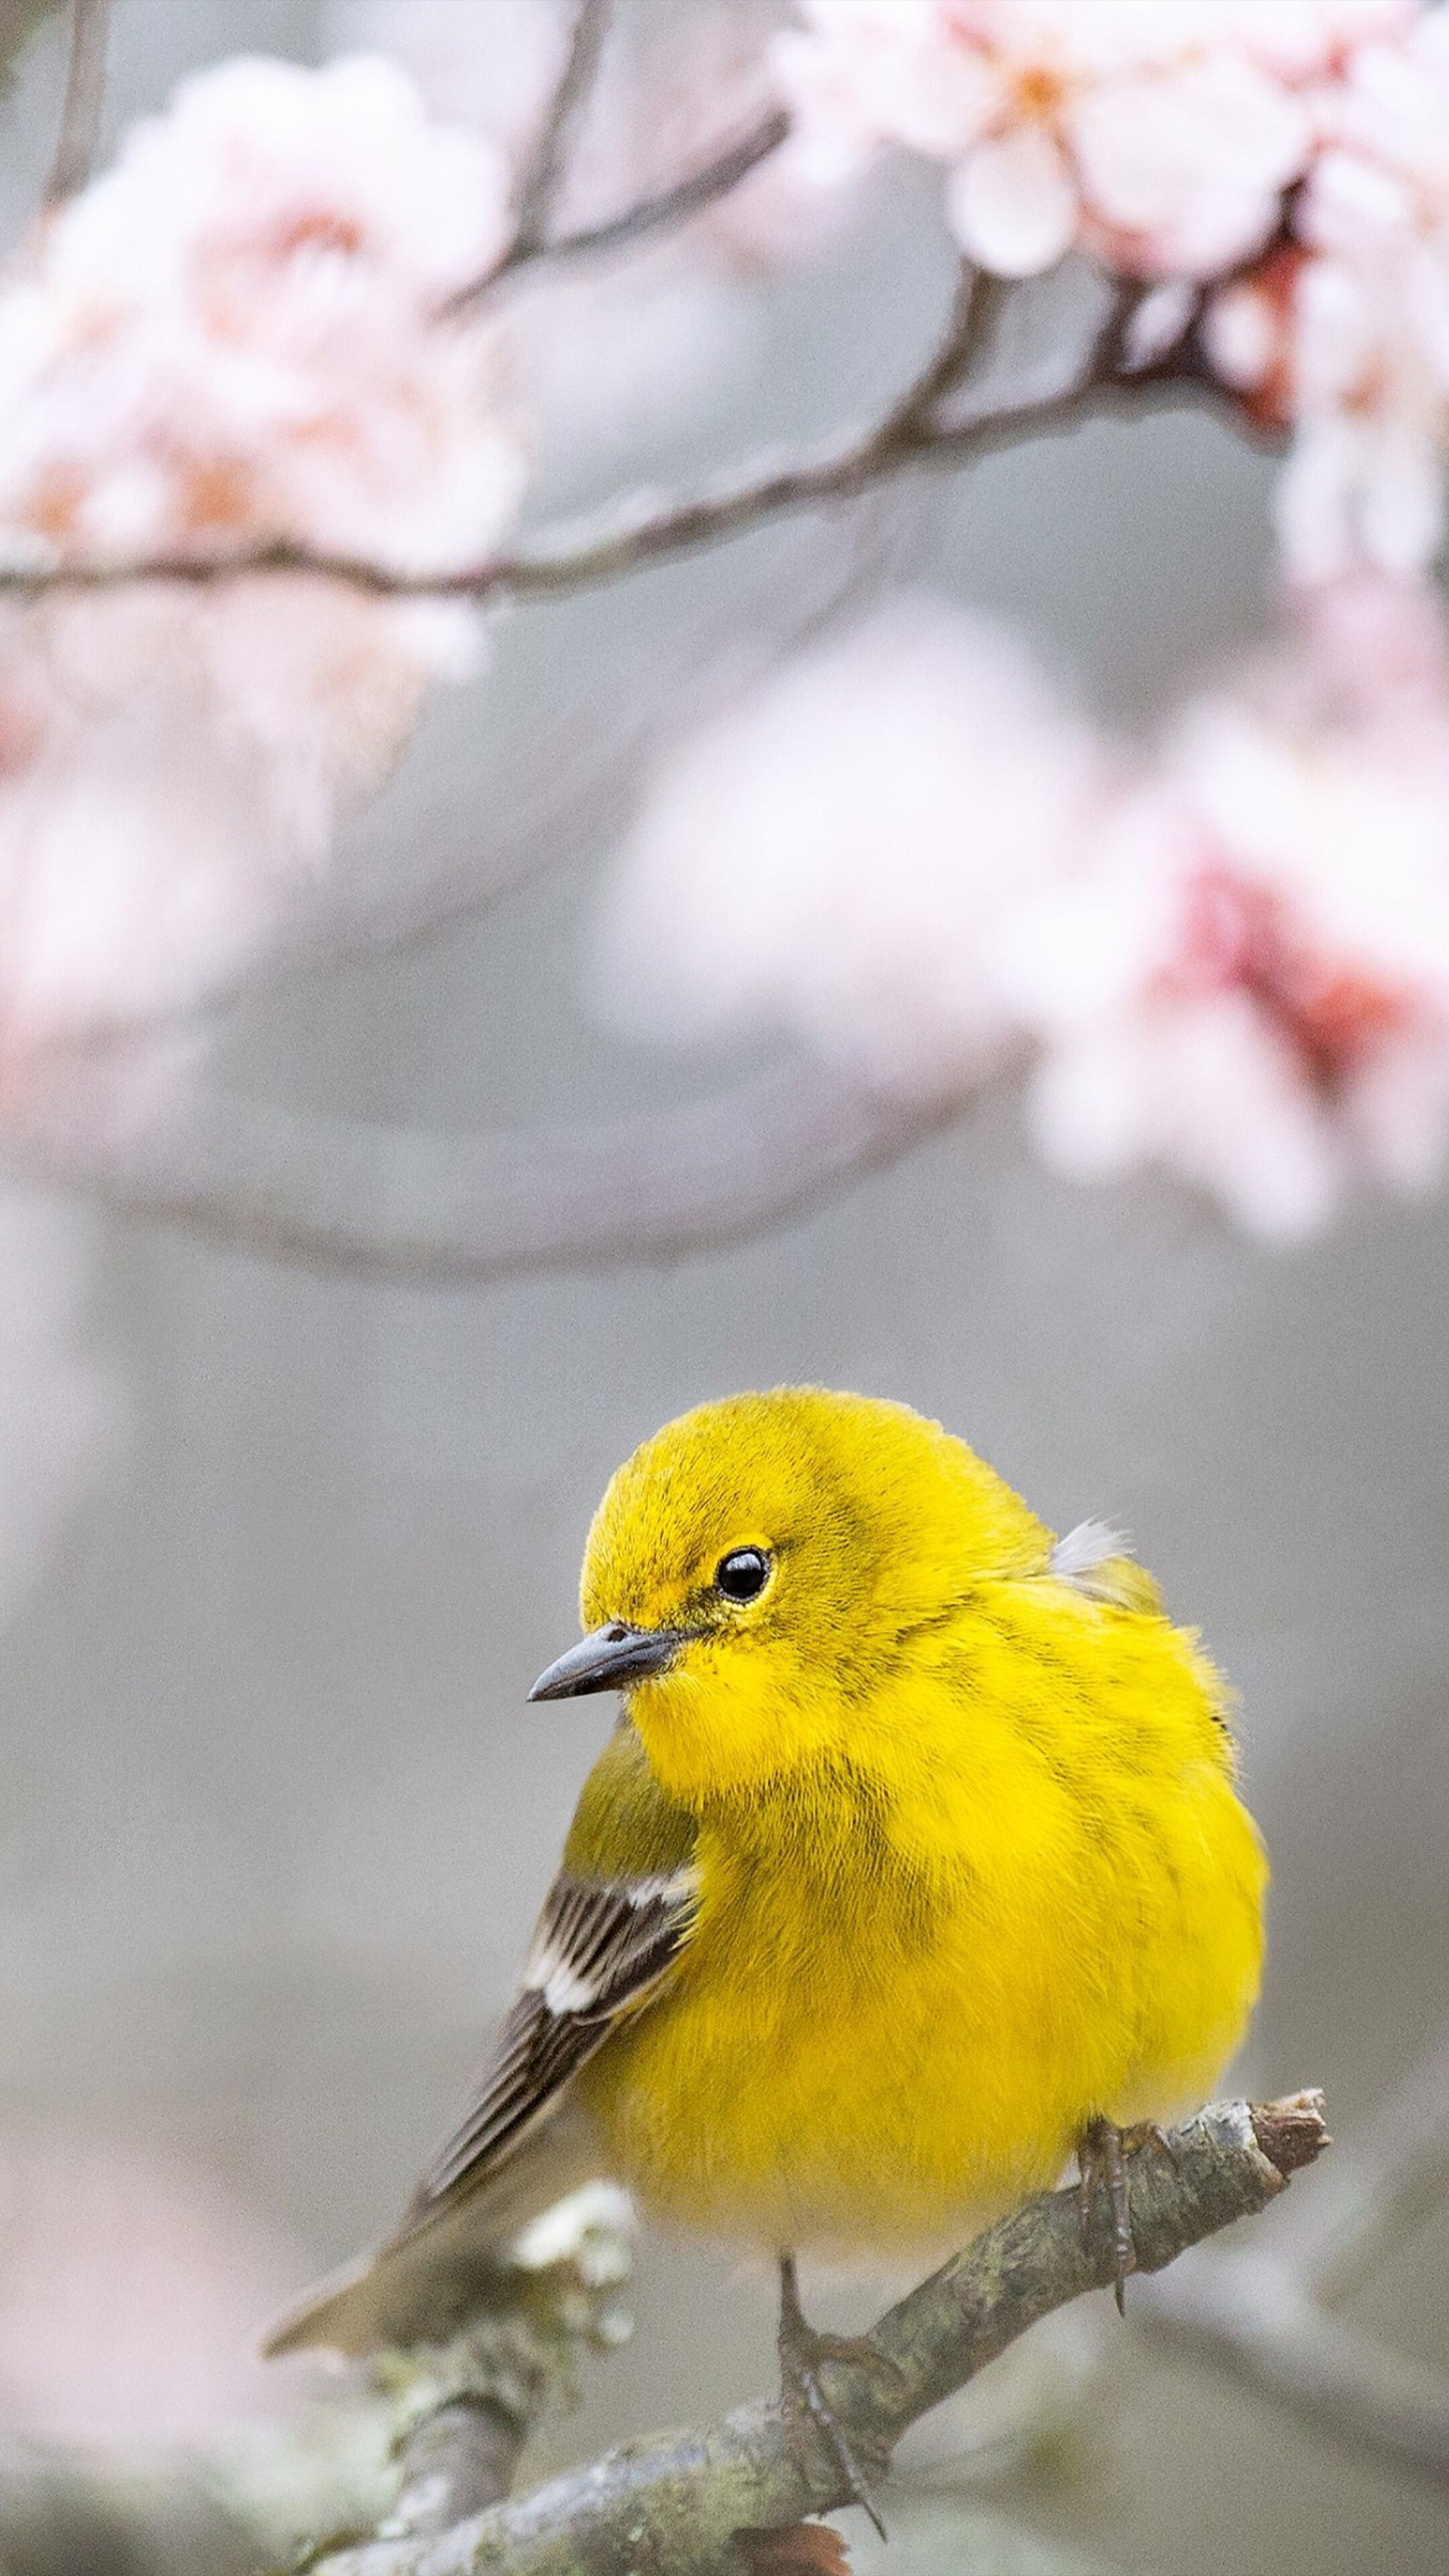 Bird: Pine warbler, A small songbird of the New World warbler family. 2160x3840 4K Background.